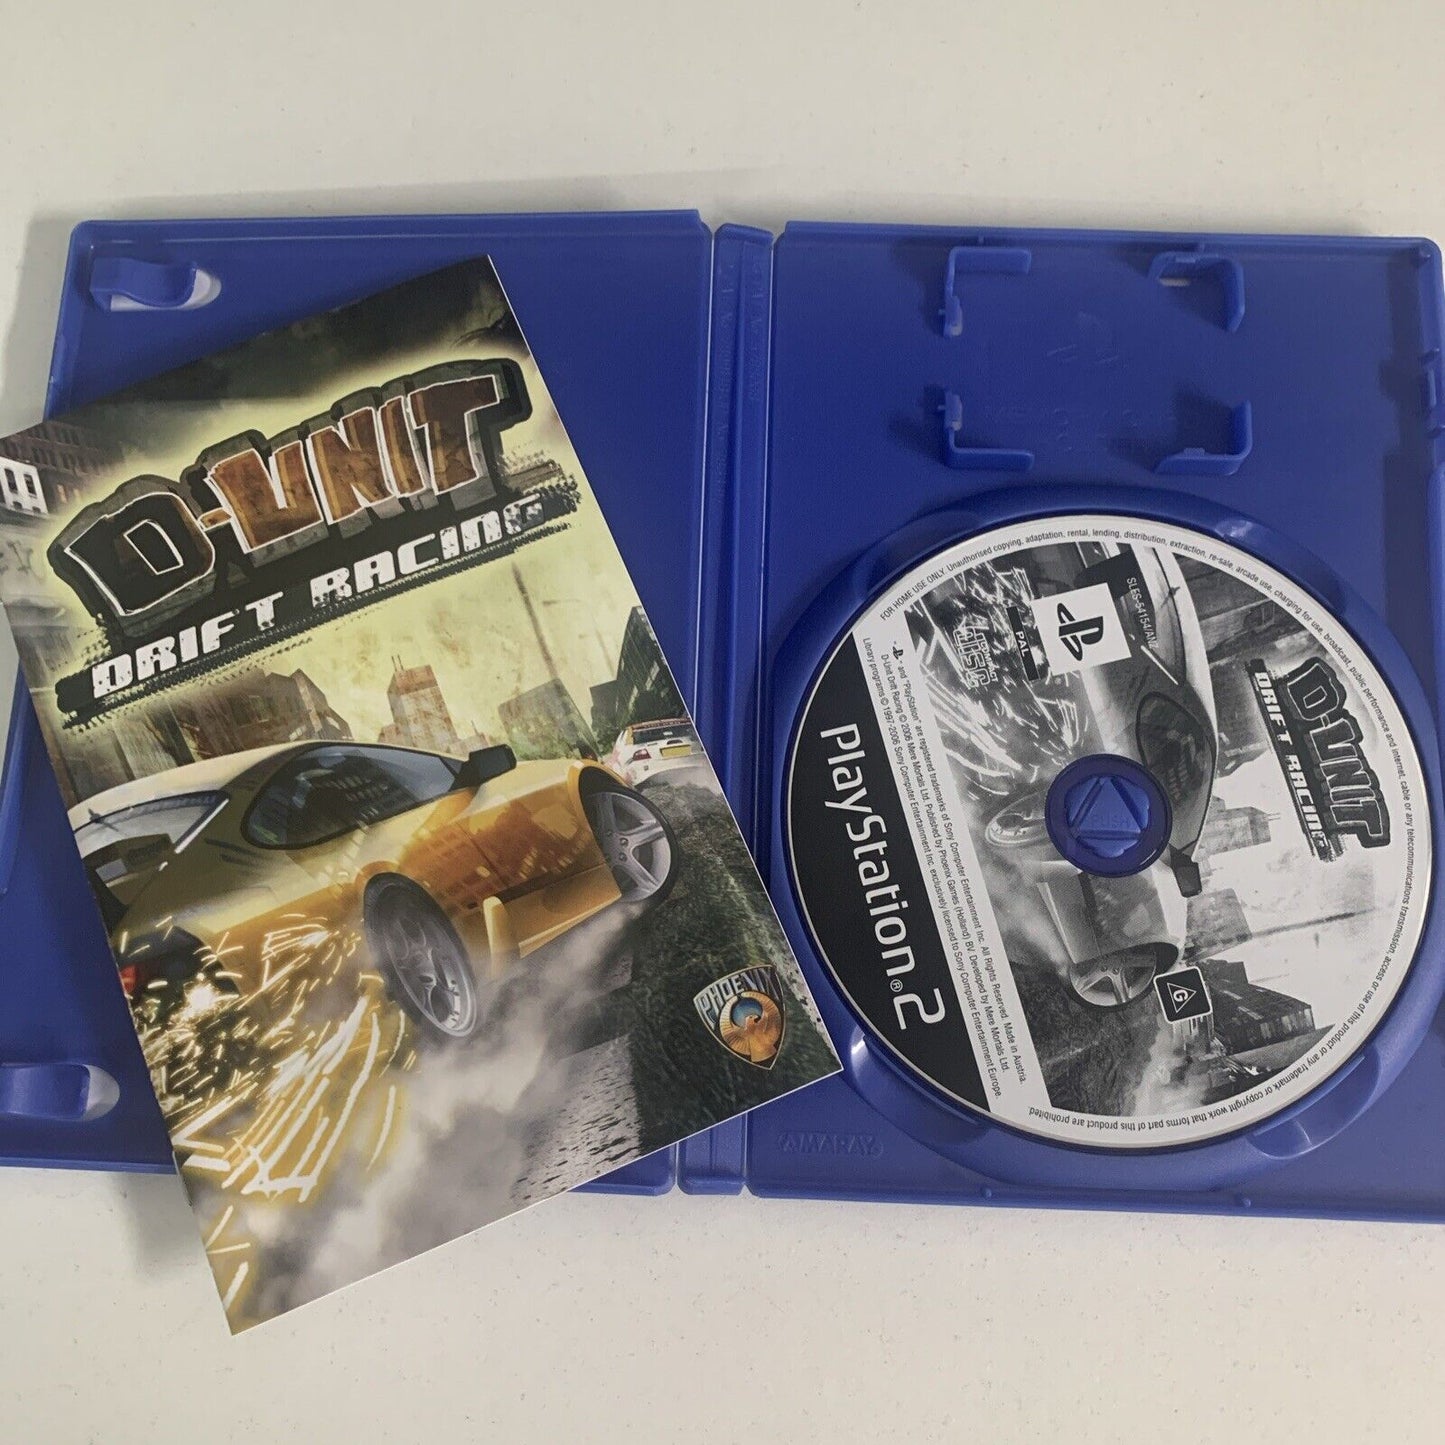 D Unit Drift Racing PlayStation 2 PS2 Game